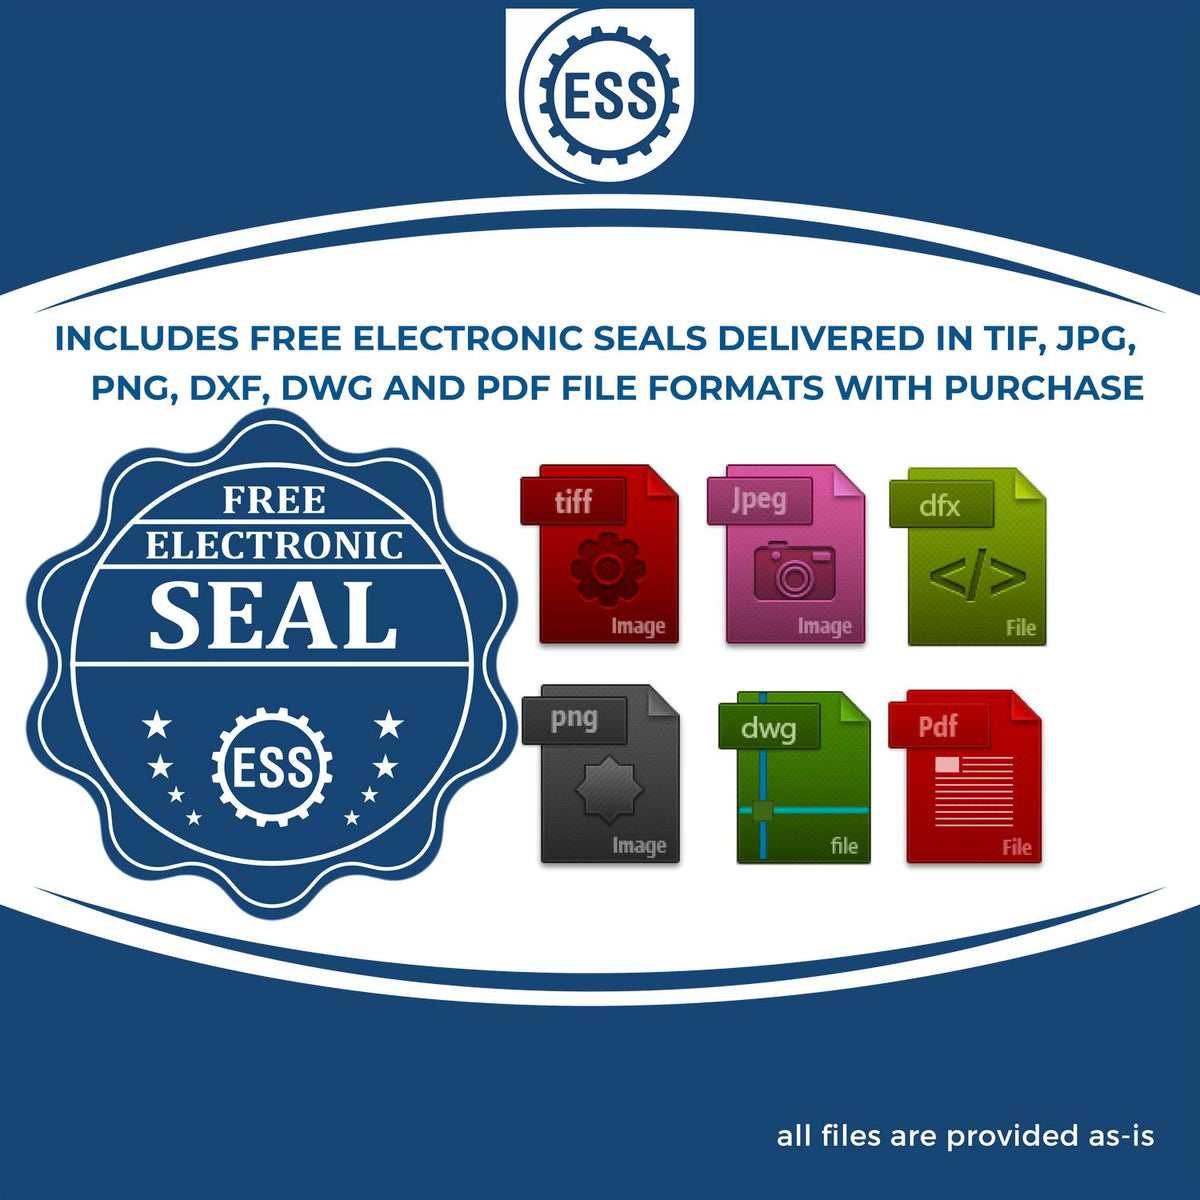 An infographic for the free electronic seal for the Heavy Duty Cast Iron New Hampshire Architect Embosser illustrating the different file type icons such as DXF, DWG, TIF, JPG and PNG.